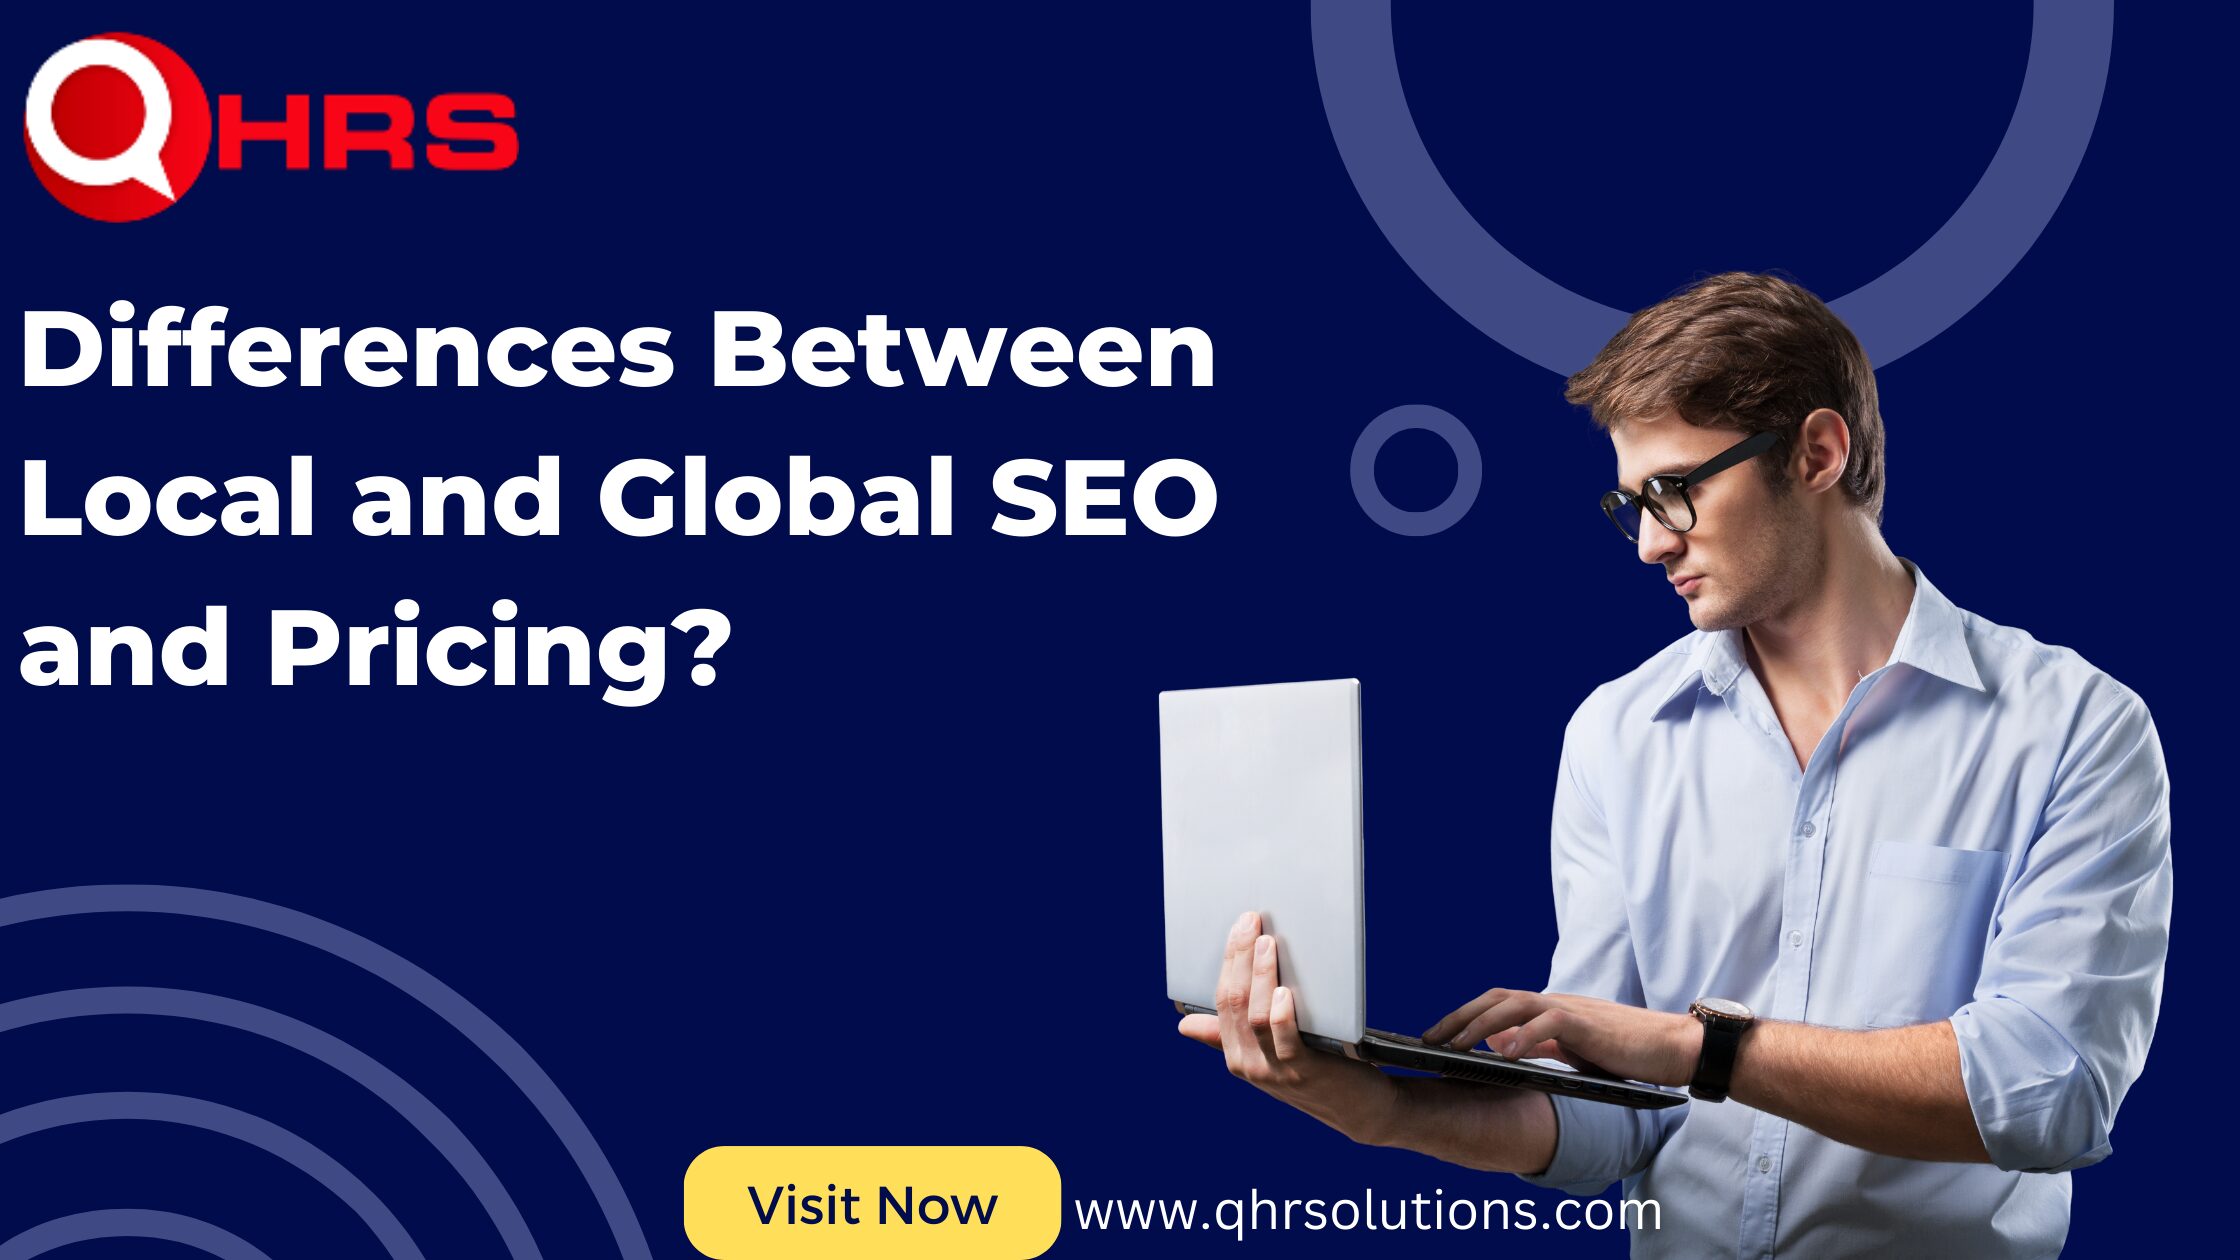 Differences Between Local and Global SEO and Pricing